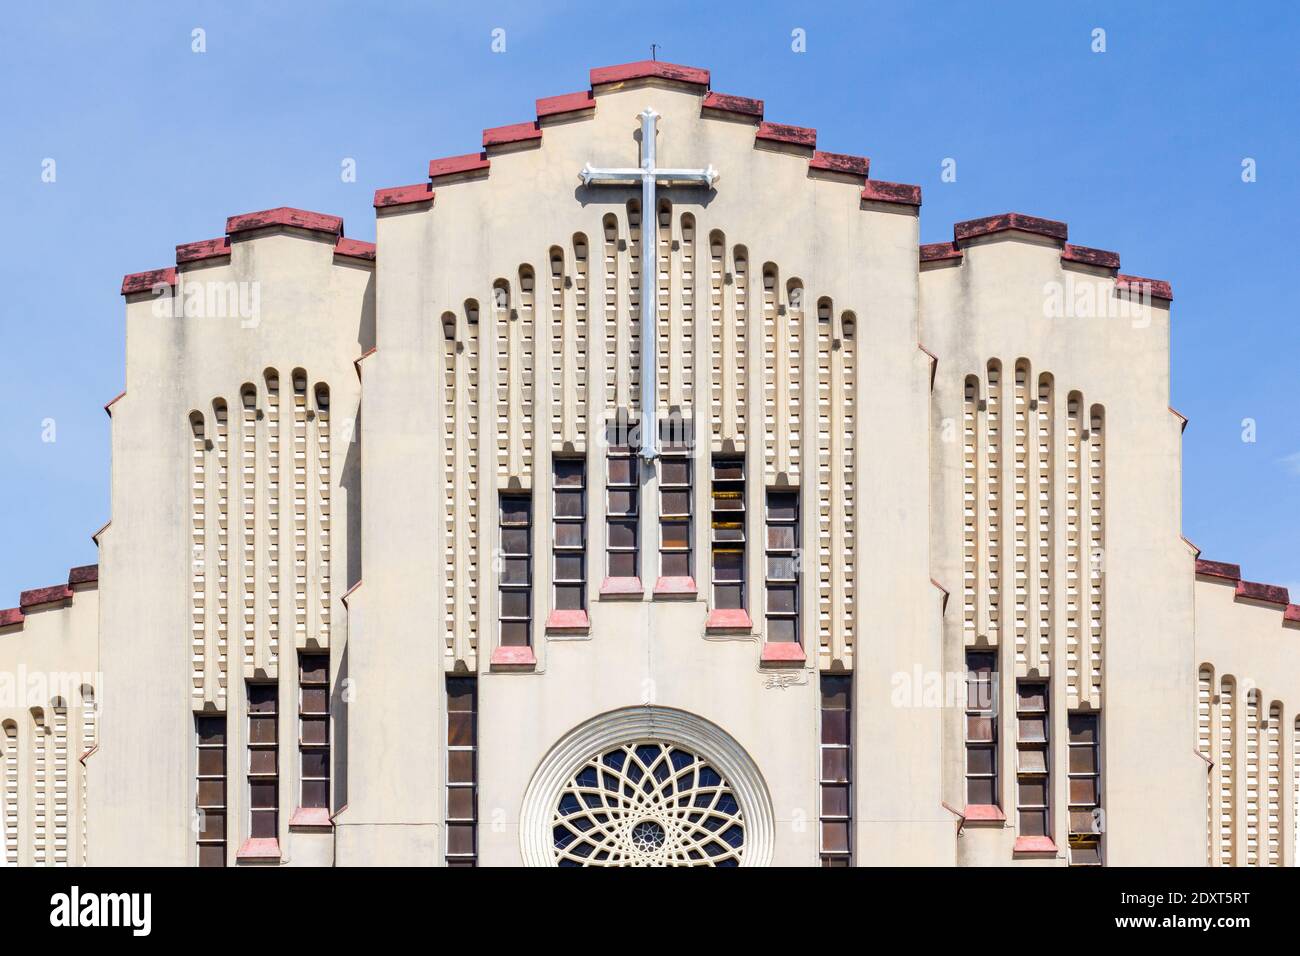 Facade of the National Shrine of Our Mother of Perpetual Help in Baclaran, Philippines Stock Photo